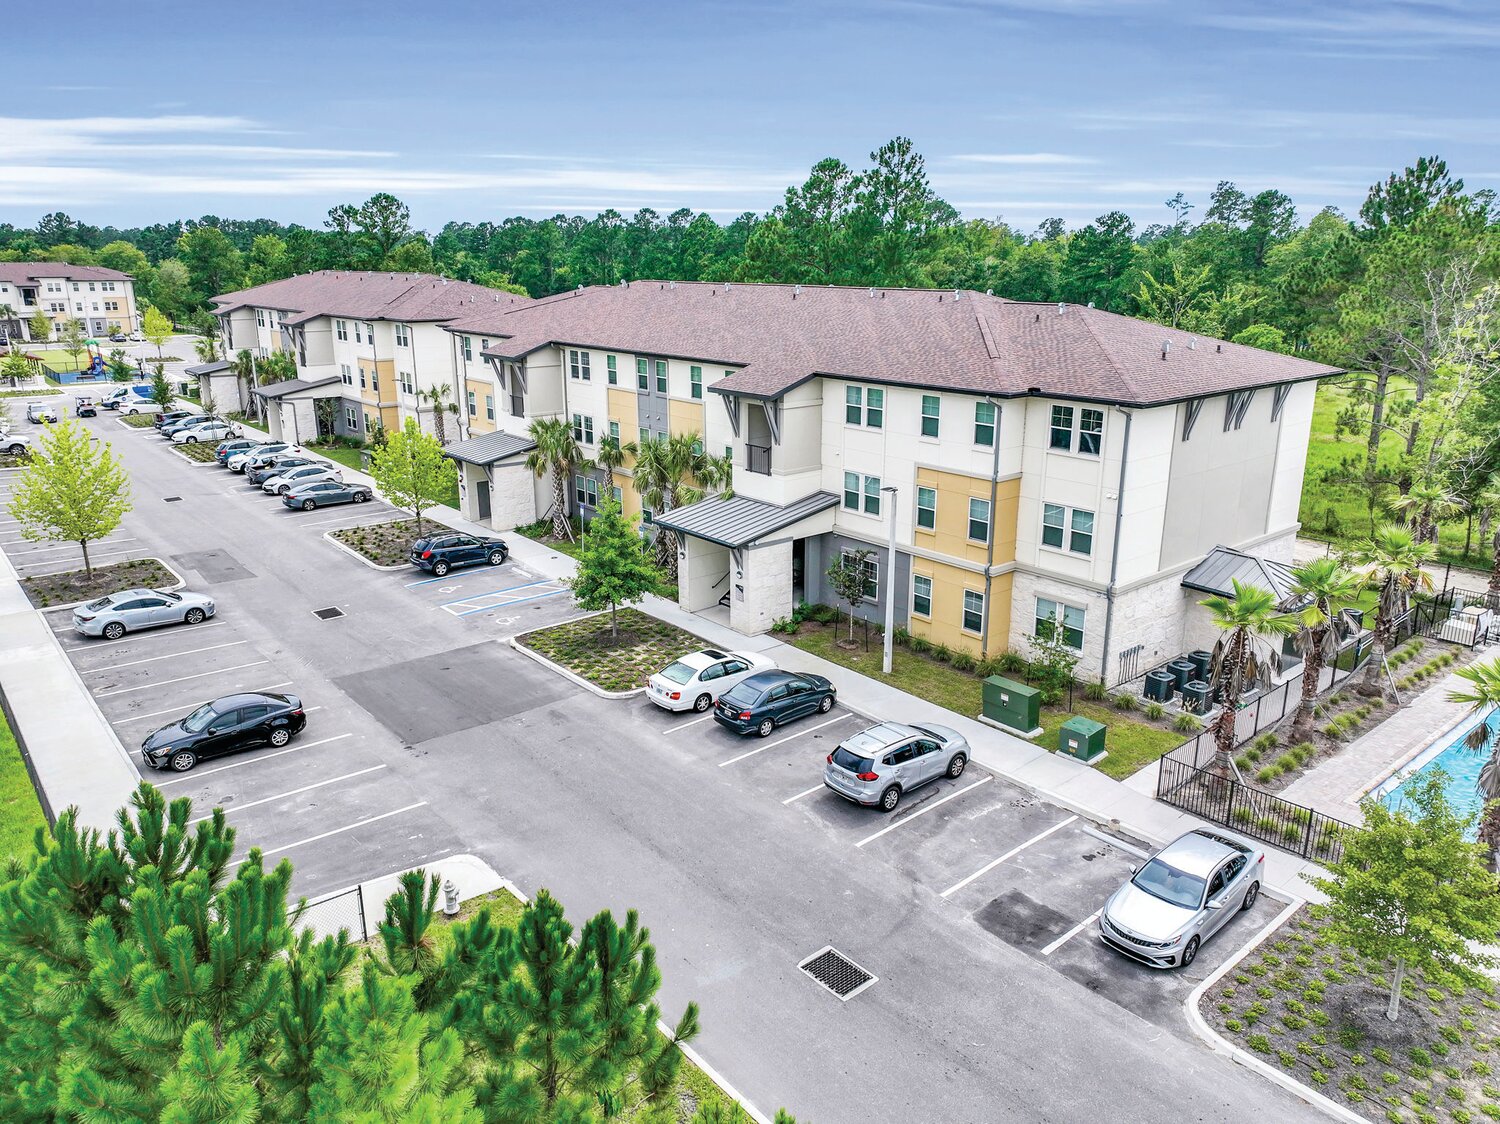 Bryce Landing features 96 units in Middleburg off County Road 220. Every unit is leased, and rent payments range from $380 to $1,233 a month